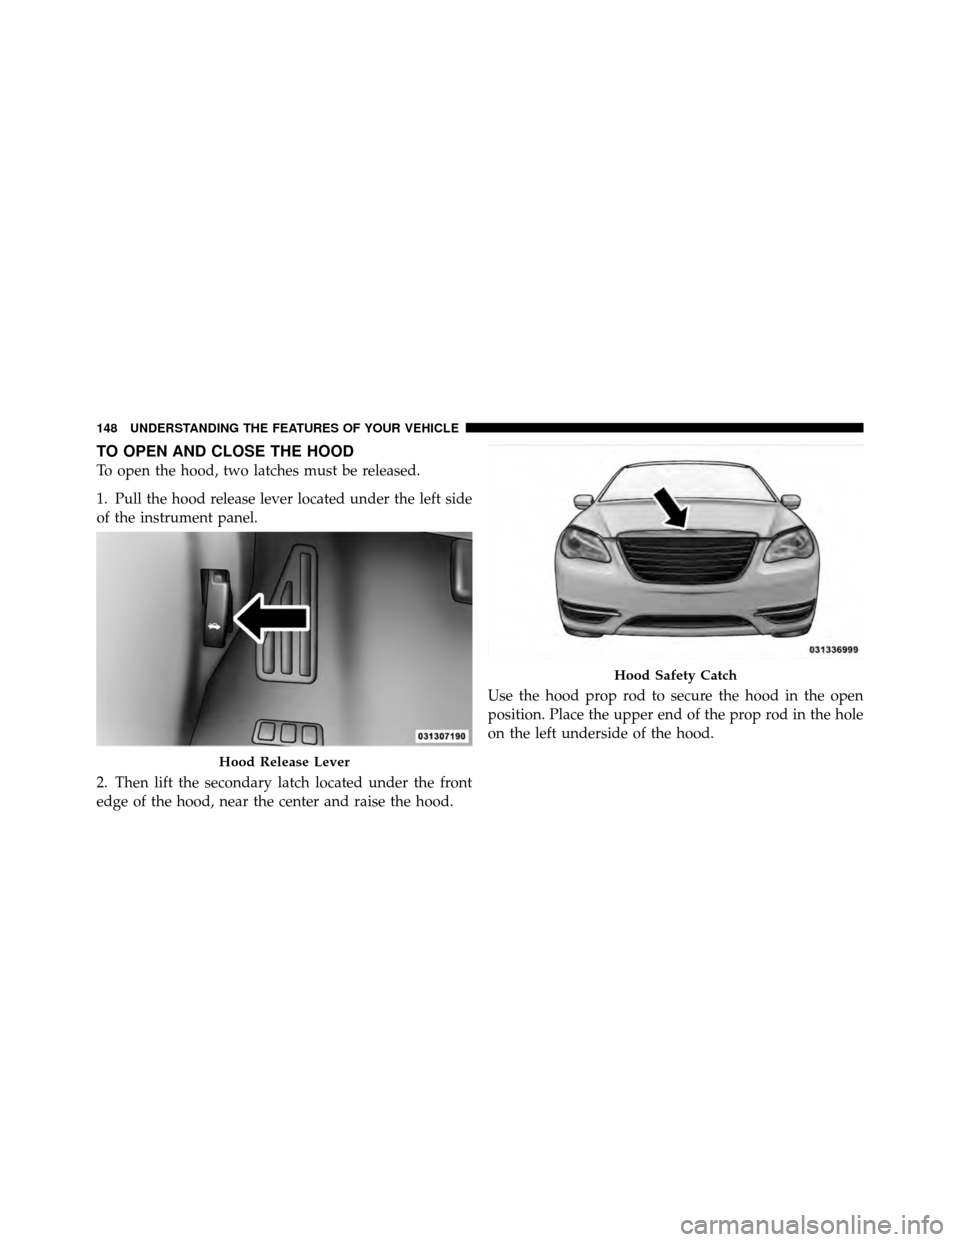 CHRYSLER 200 2012 1.G Owners Manual TO OPEN AND CLOSE THE HOOD
To open the hood, two latches must be released.
1. Pull the hood release lever located under the left side
of the instrument panel.
2. Then lift the secondary latch located 